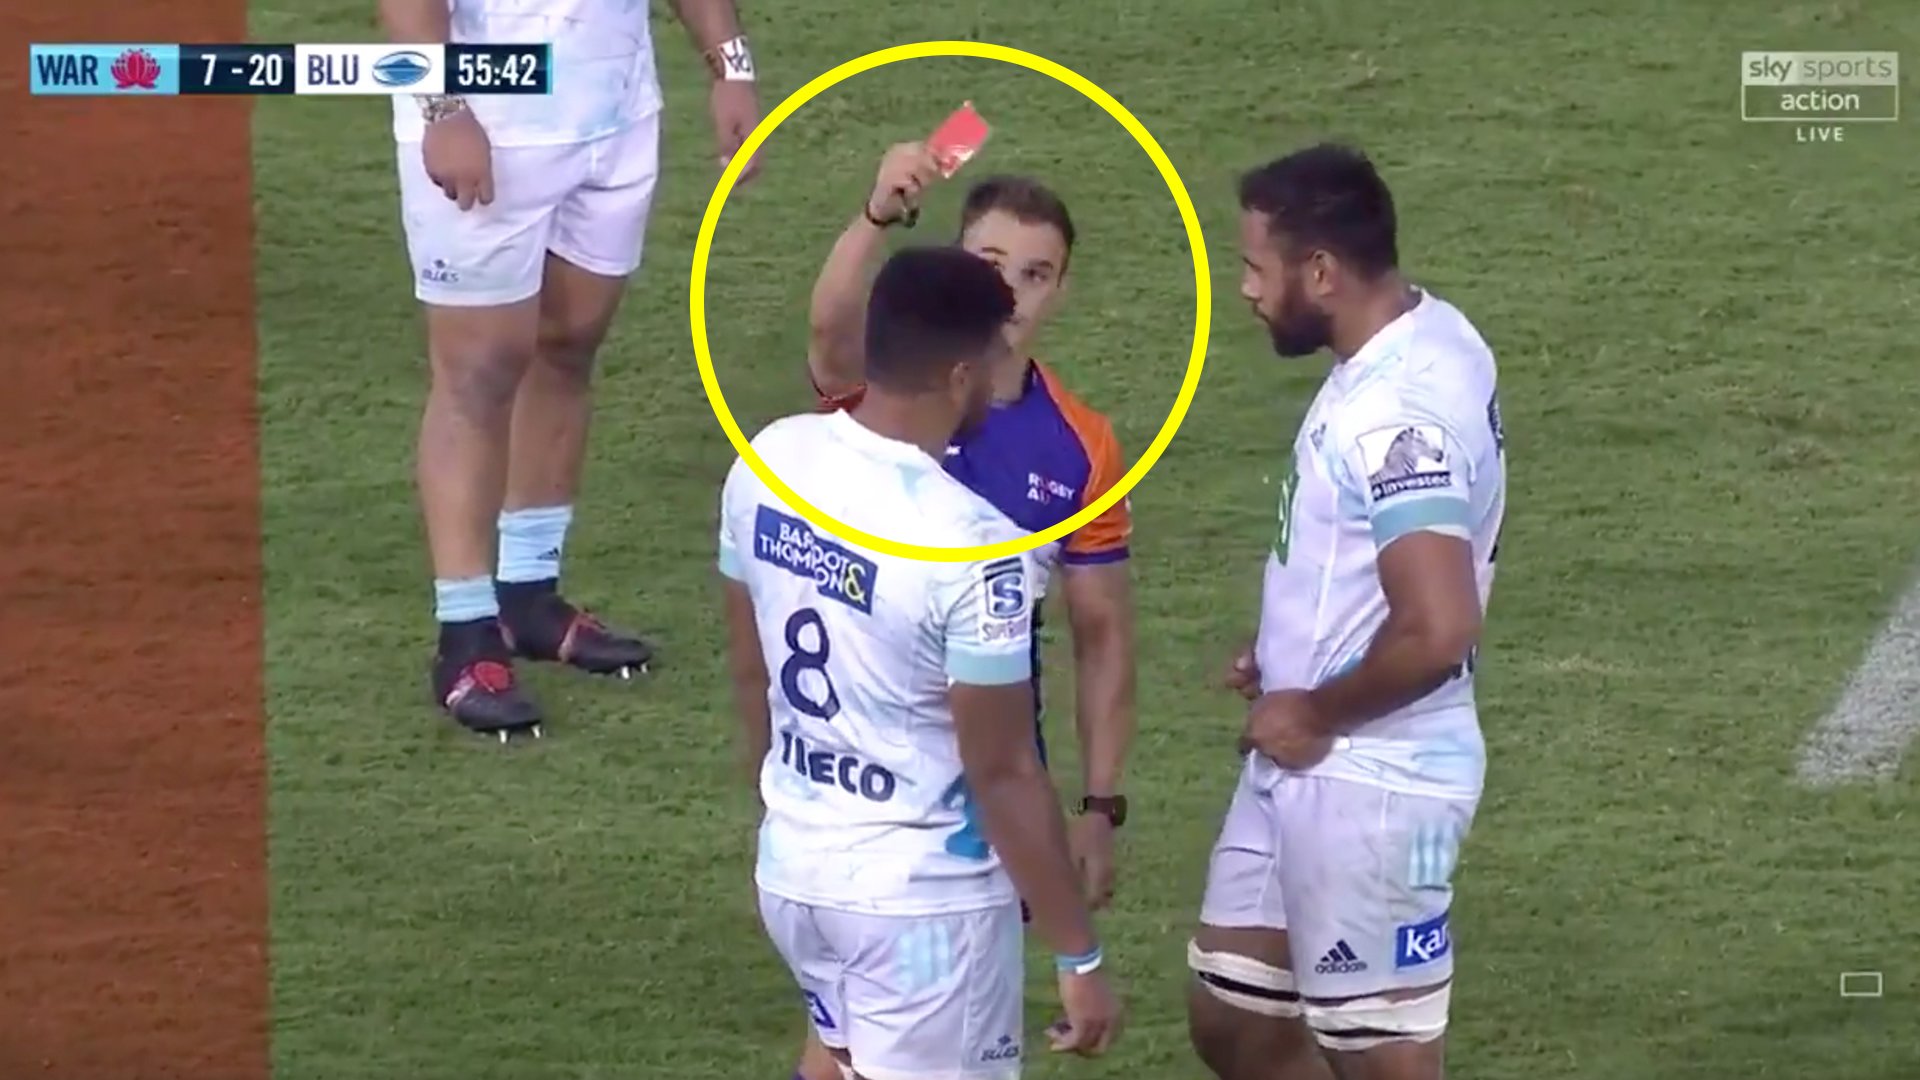 Rugby referee accidentally shows player a red card